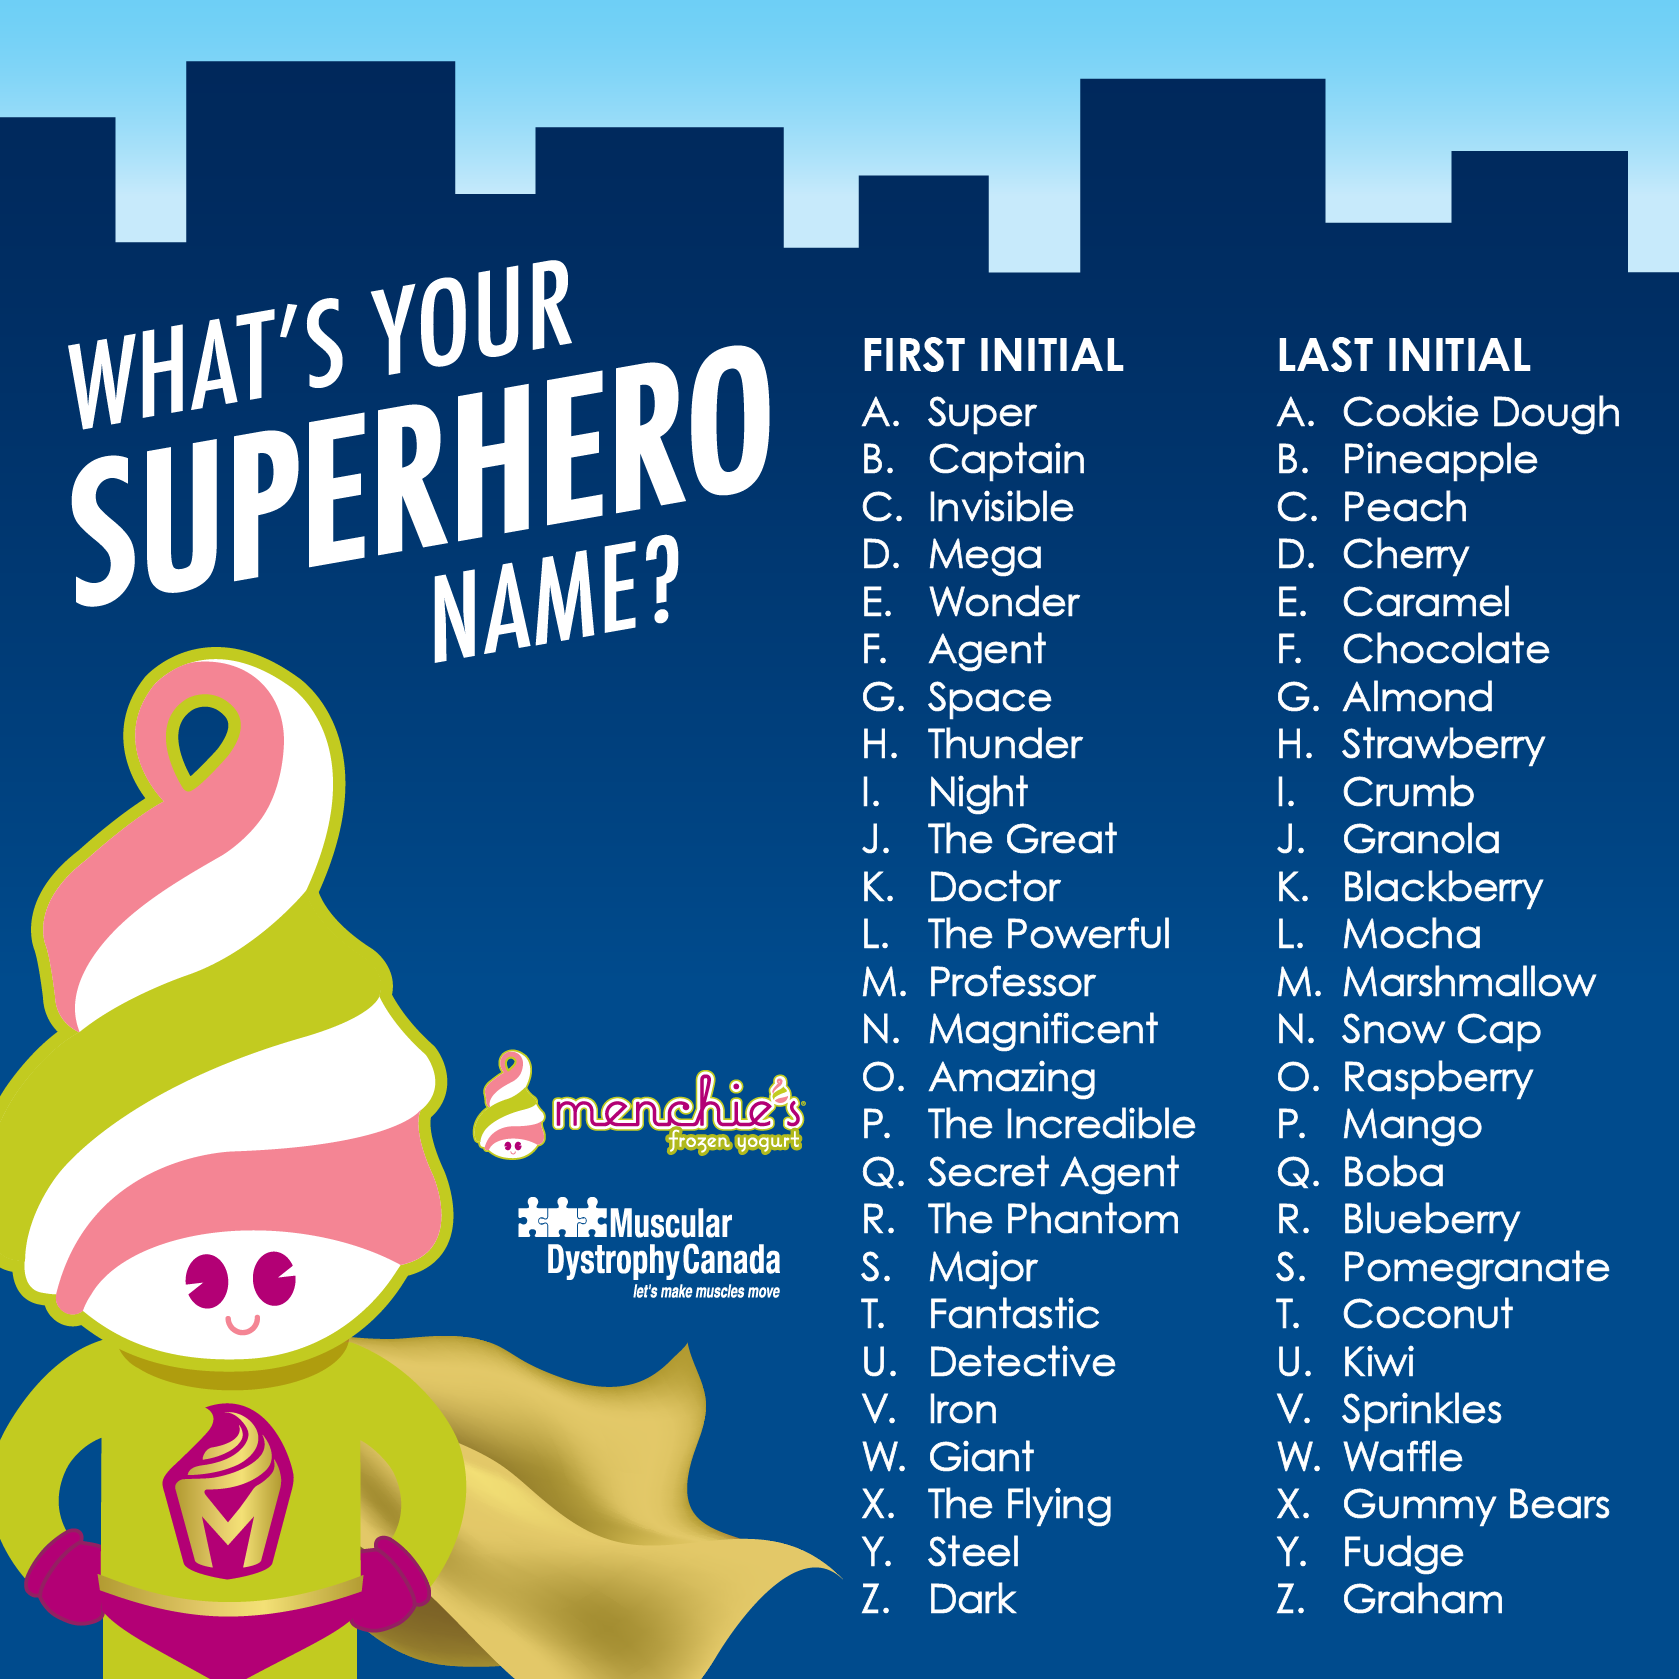 Menchies Cambie St. on Twitter "What's your superhero